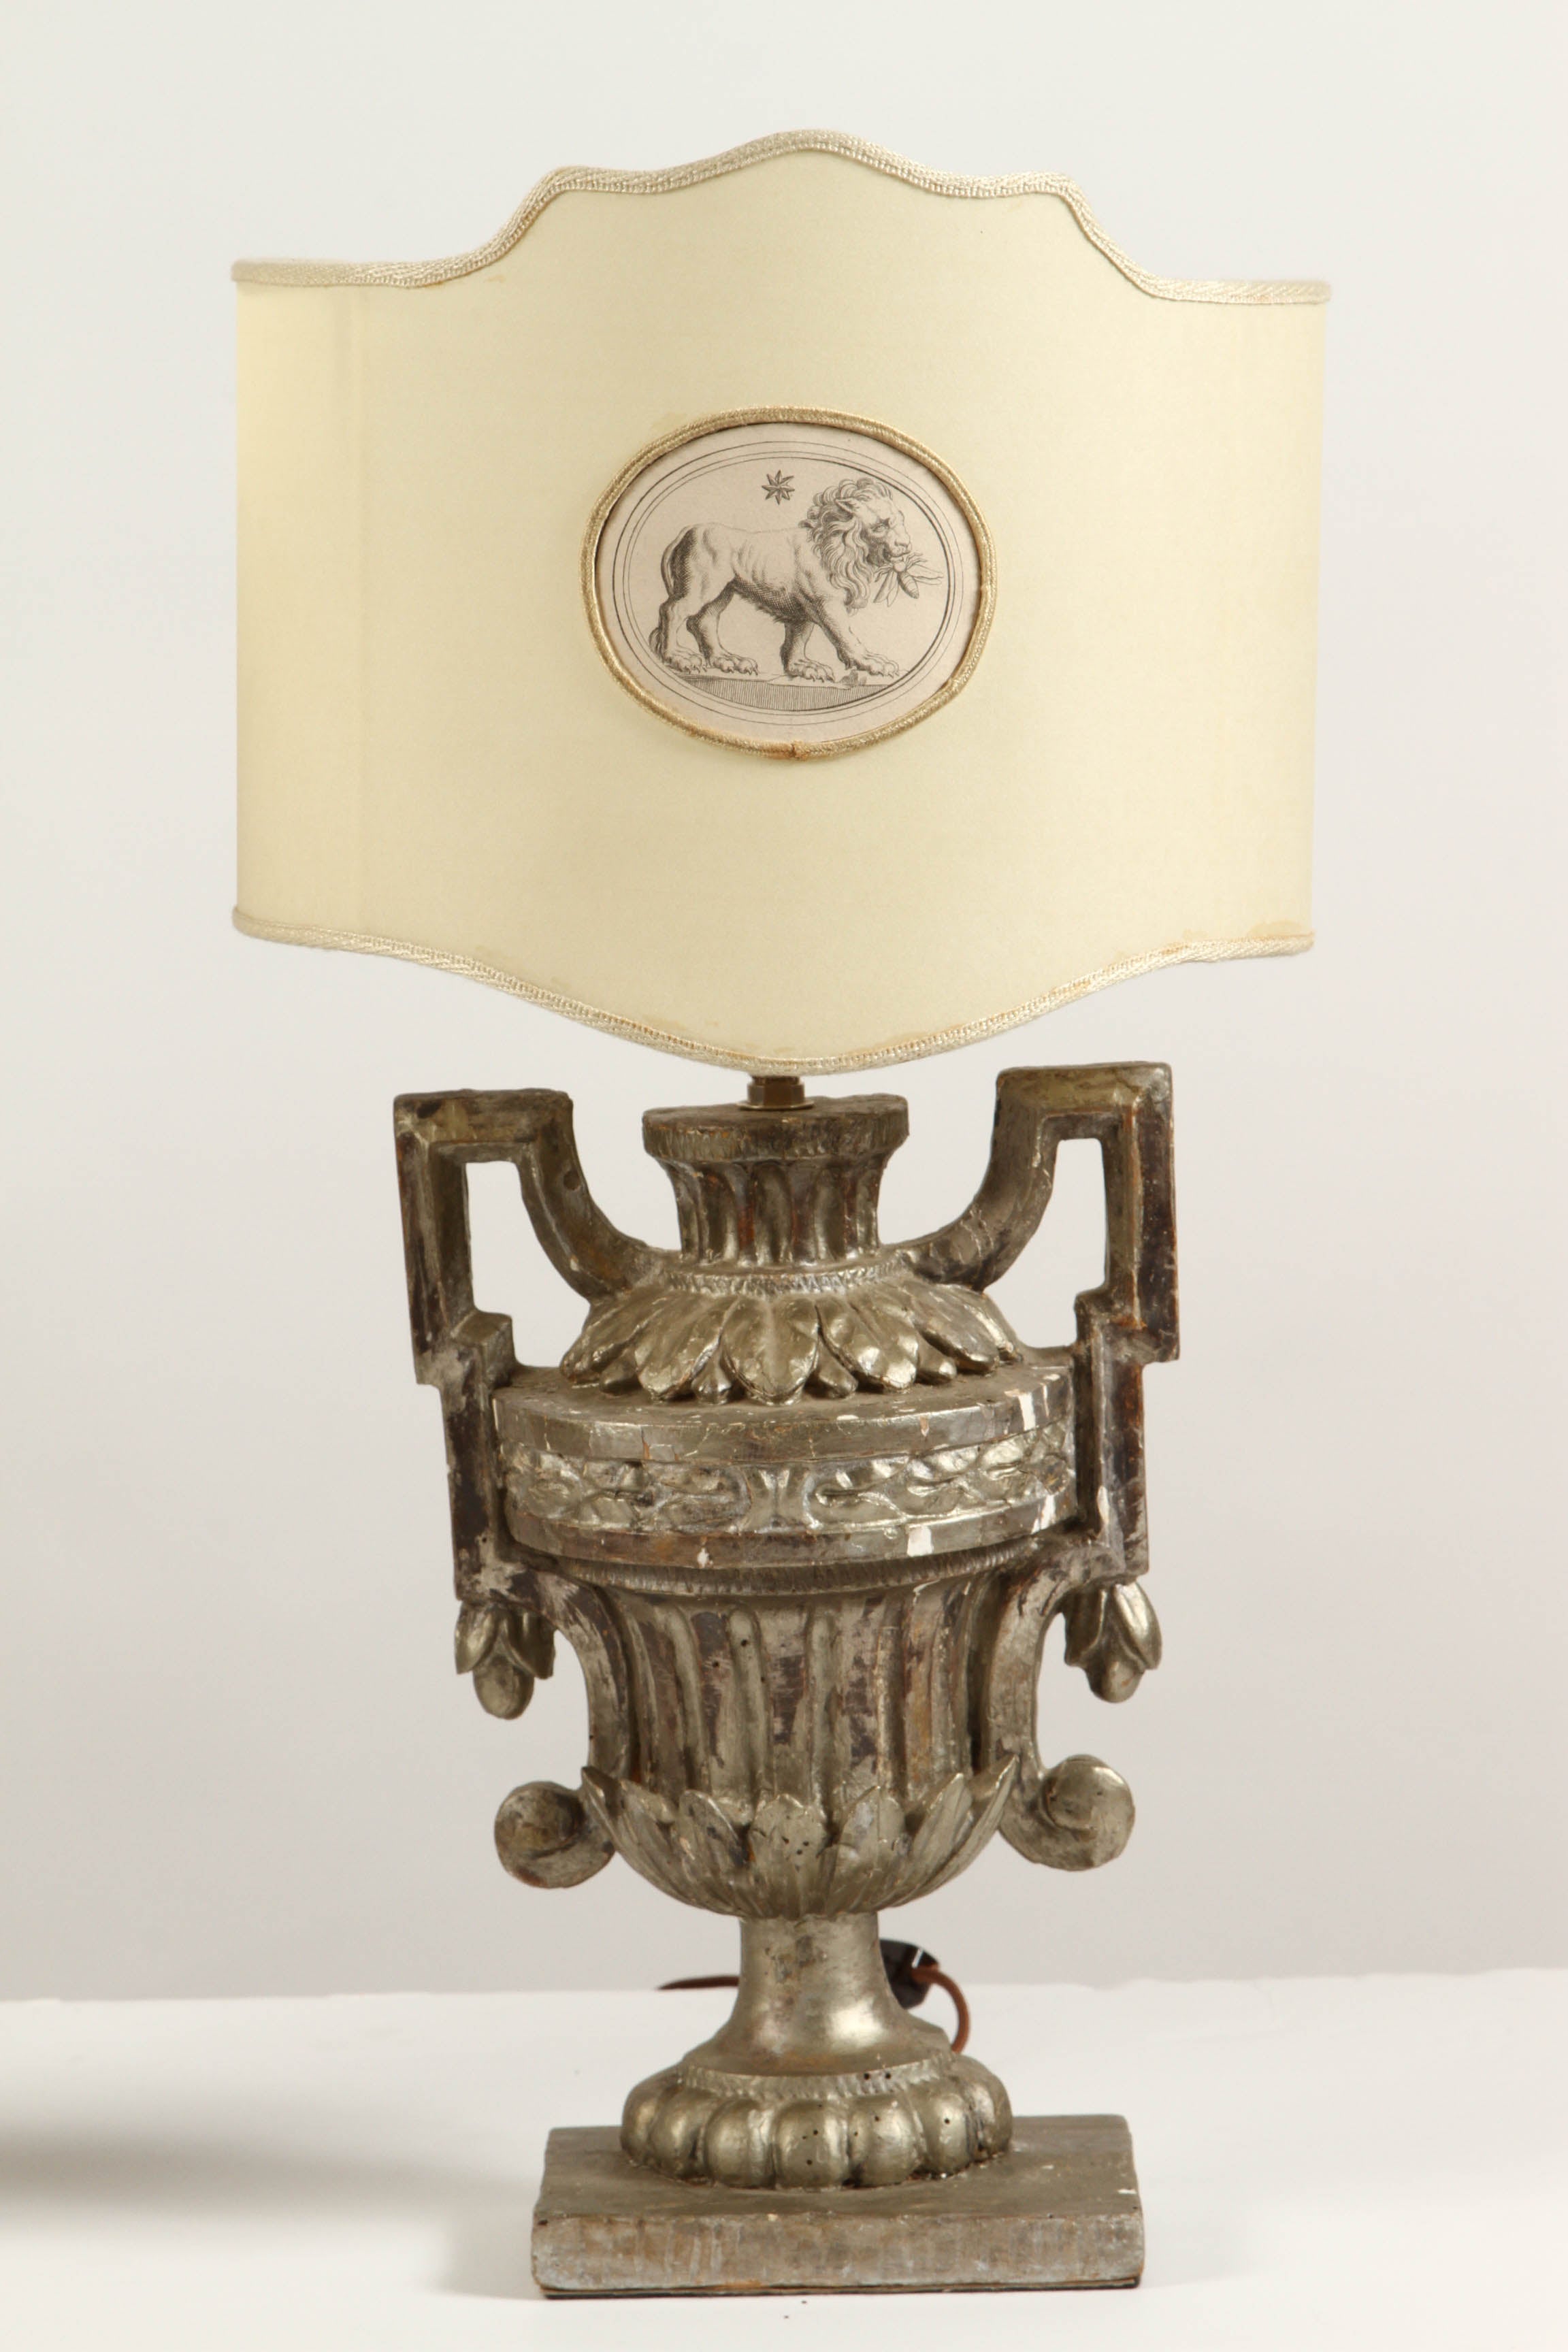 A pair of Italian lamps, dated as 18th Century, offered here with oval Florentine paper shades which are open in the back. The main body of each of these lamps is in the shape of an elaborately shaped and decorated urn with handles on each side for